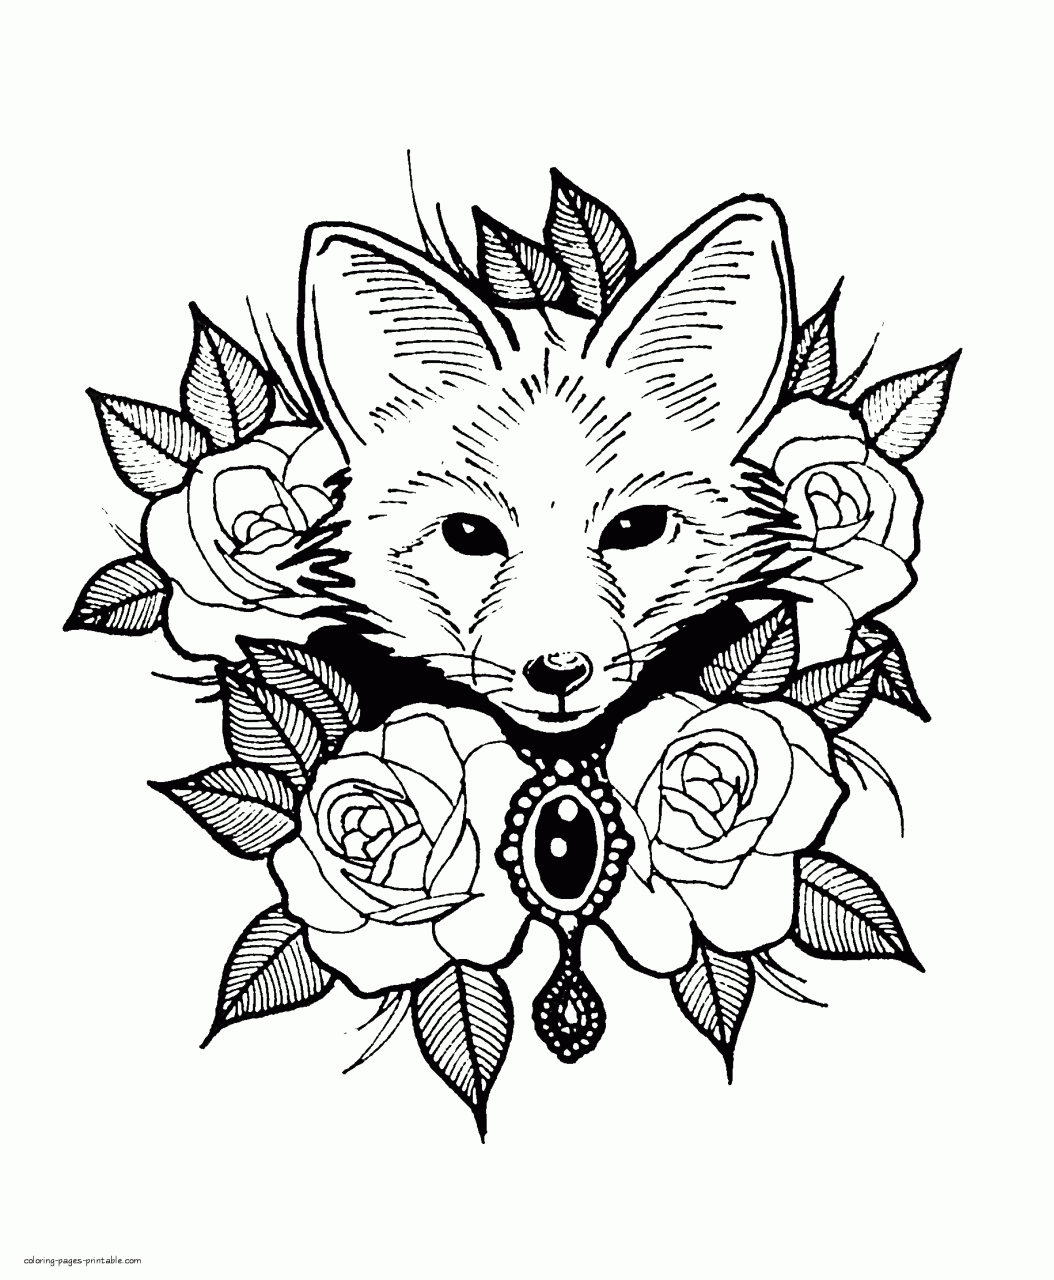 Fox Pup Coloring Page Fox coloring page, Coloring pages, Animal